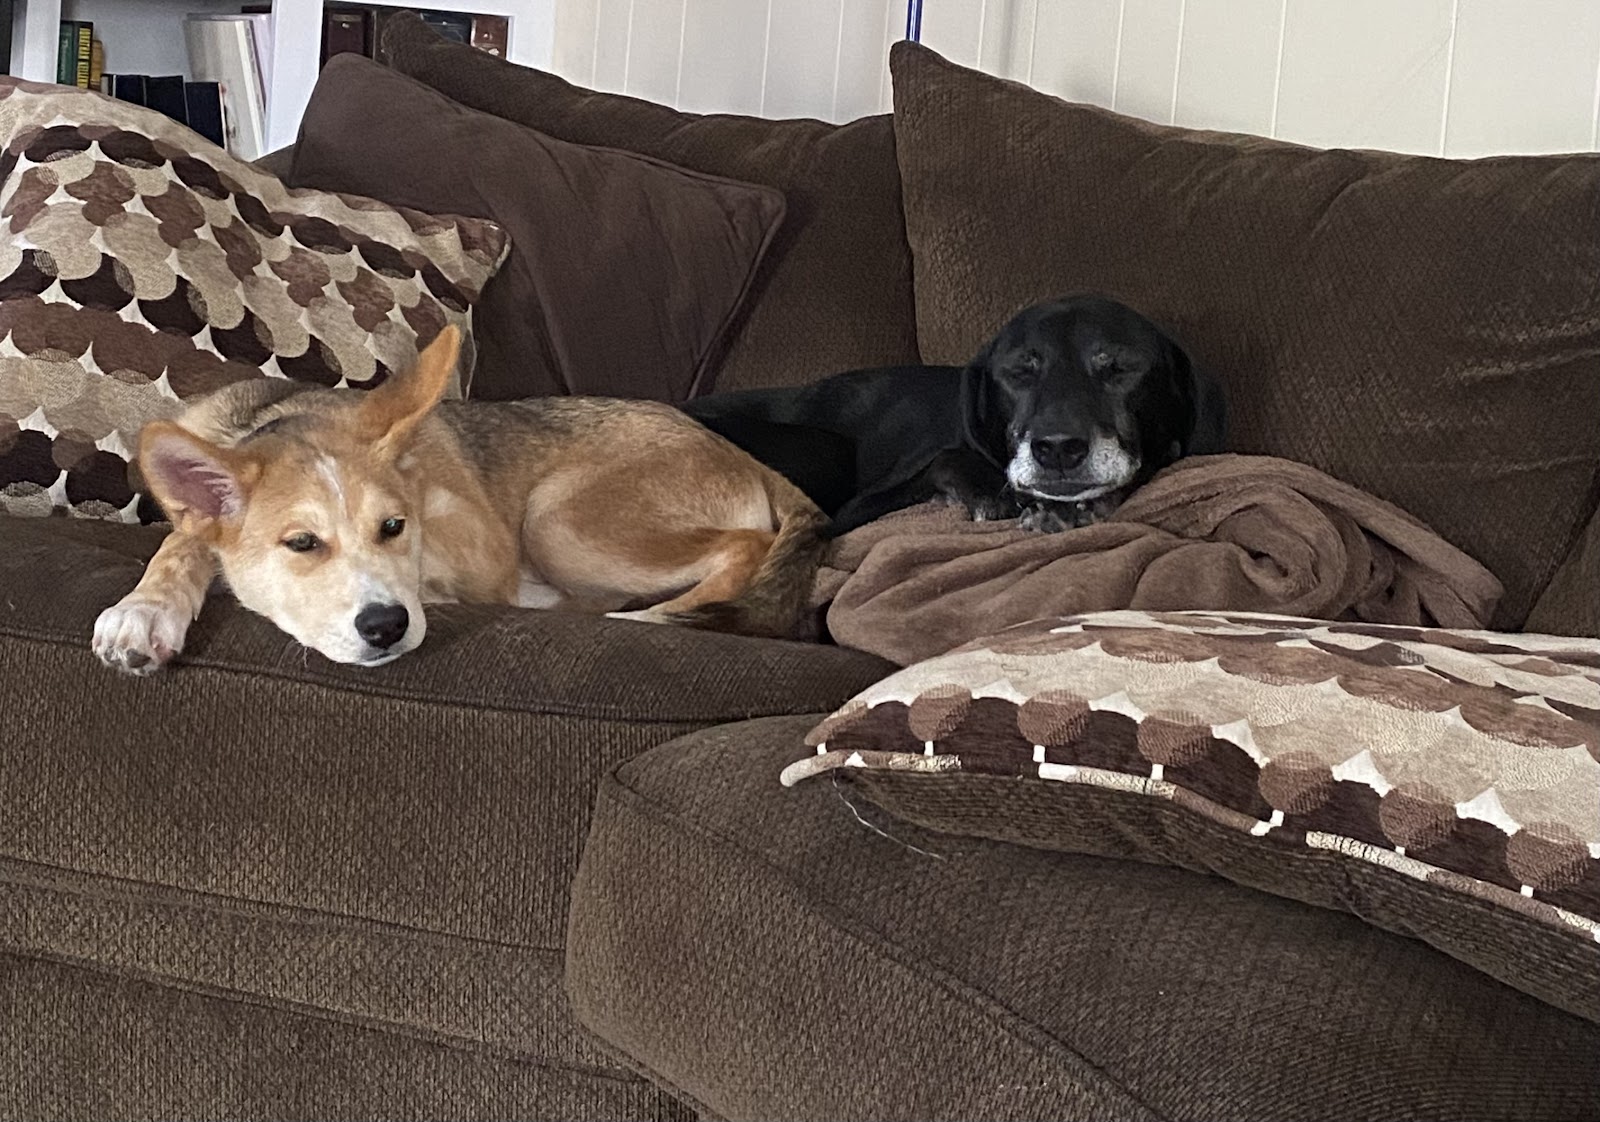 Delaney Szlezyngier's dogs sitting on couch